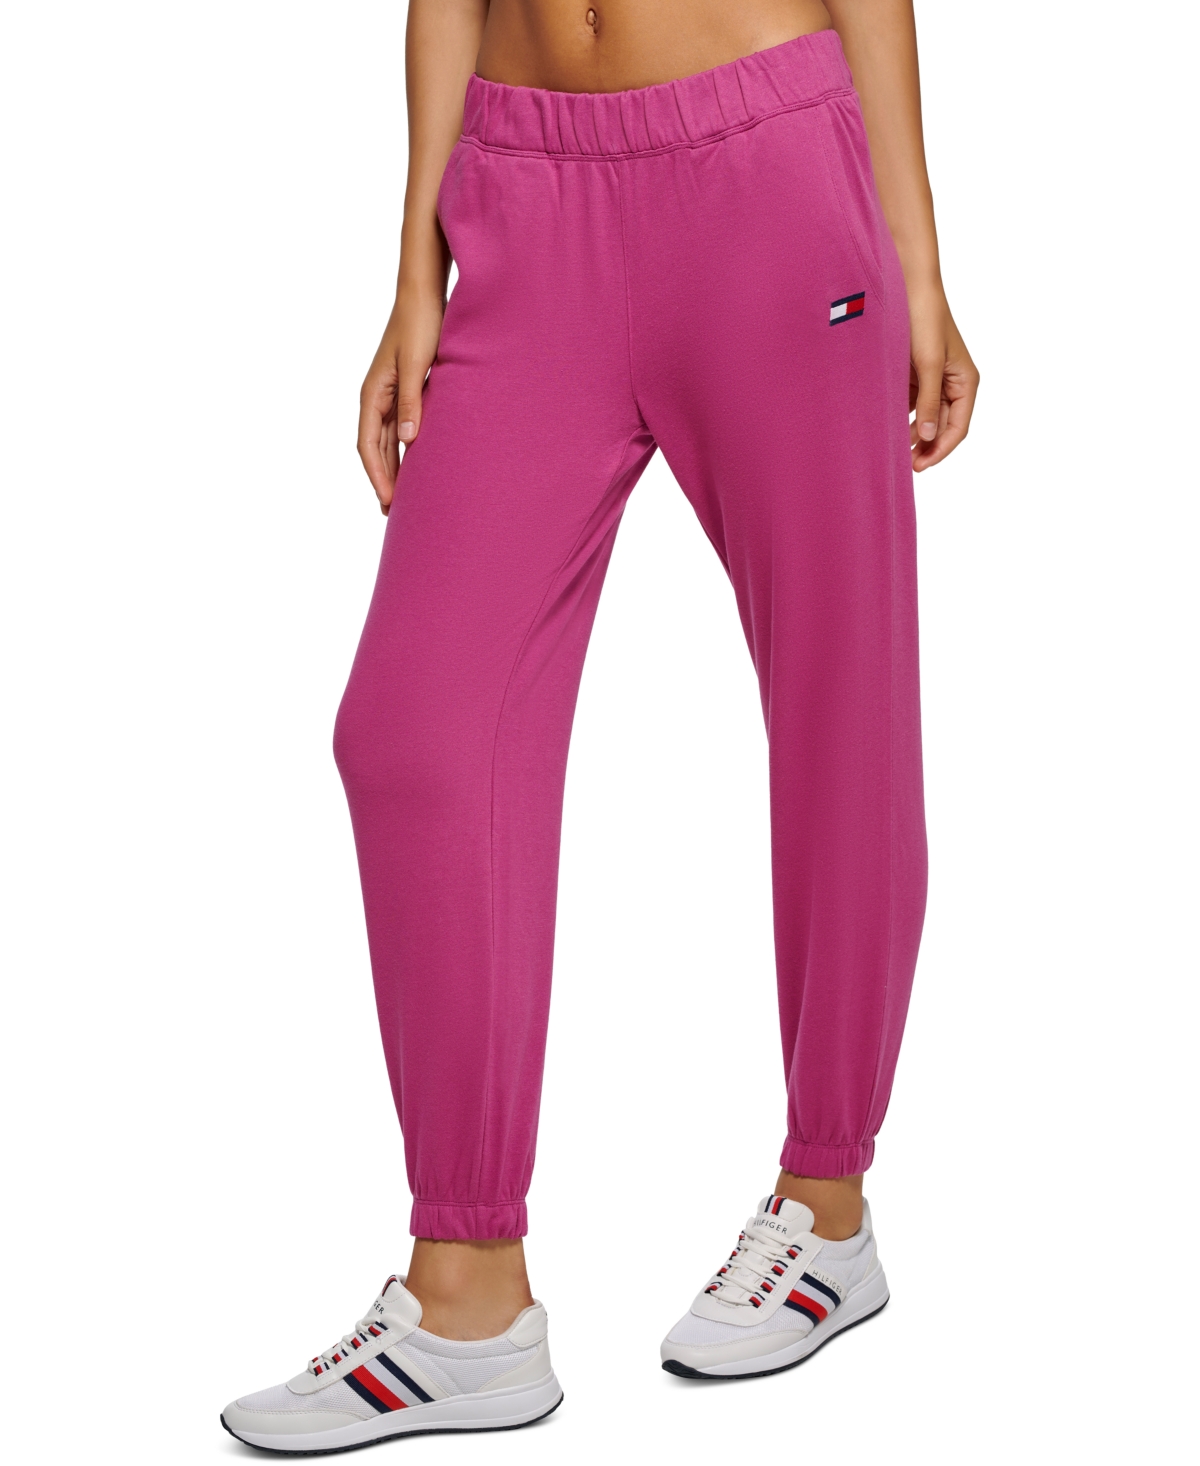 Tommy Hilfiger Sport Women's French Terry High Rise Sweatpants